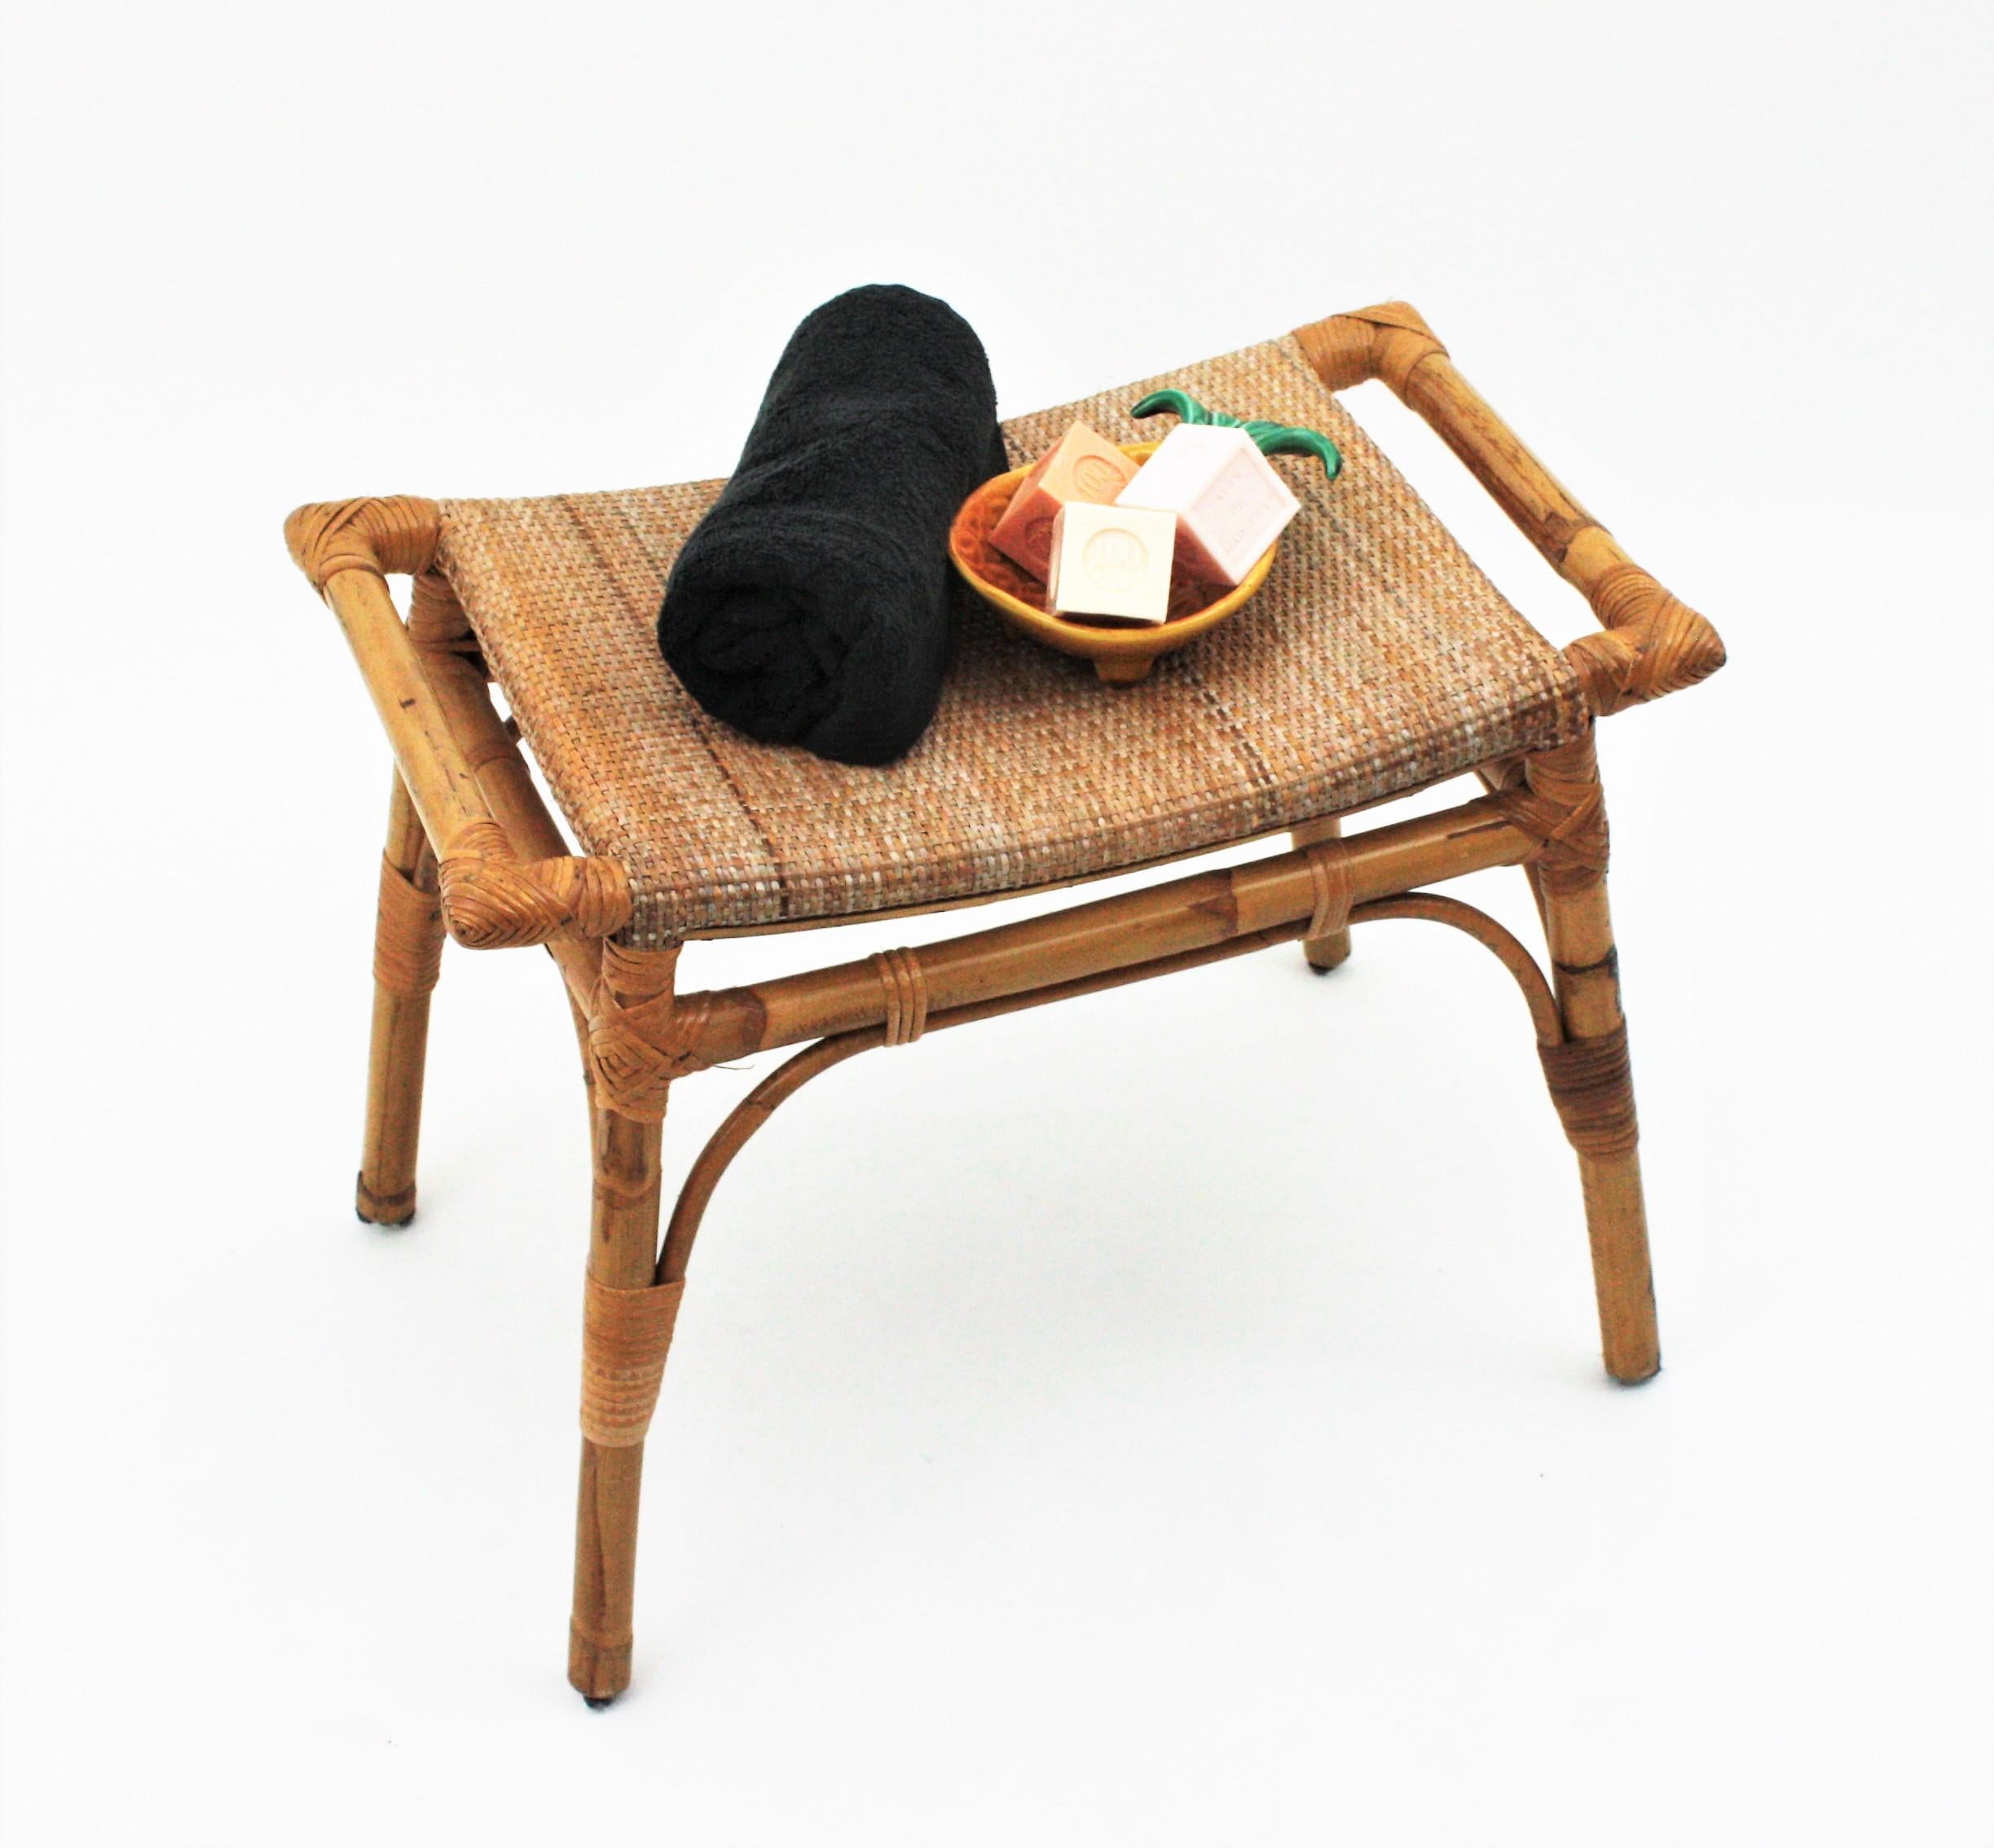 20th Century Bamboo Stool, Ottoman or Bench with Cane Seat